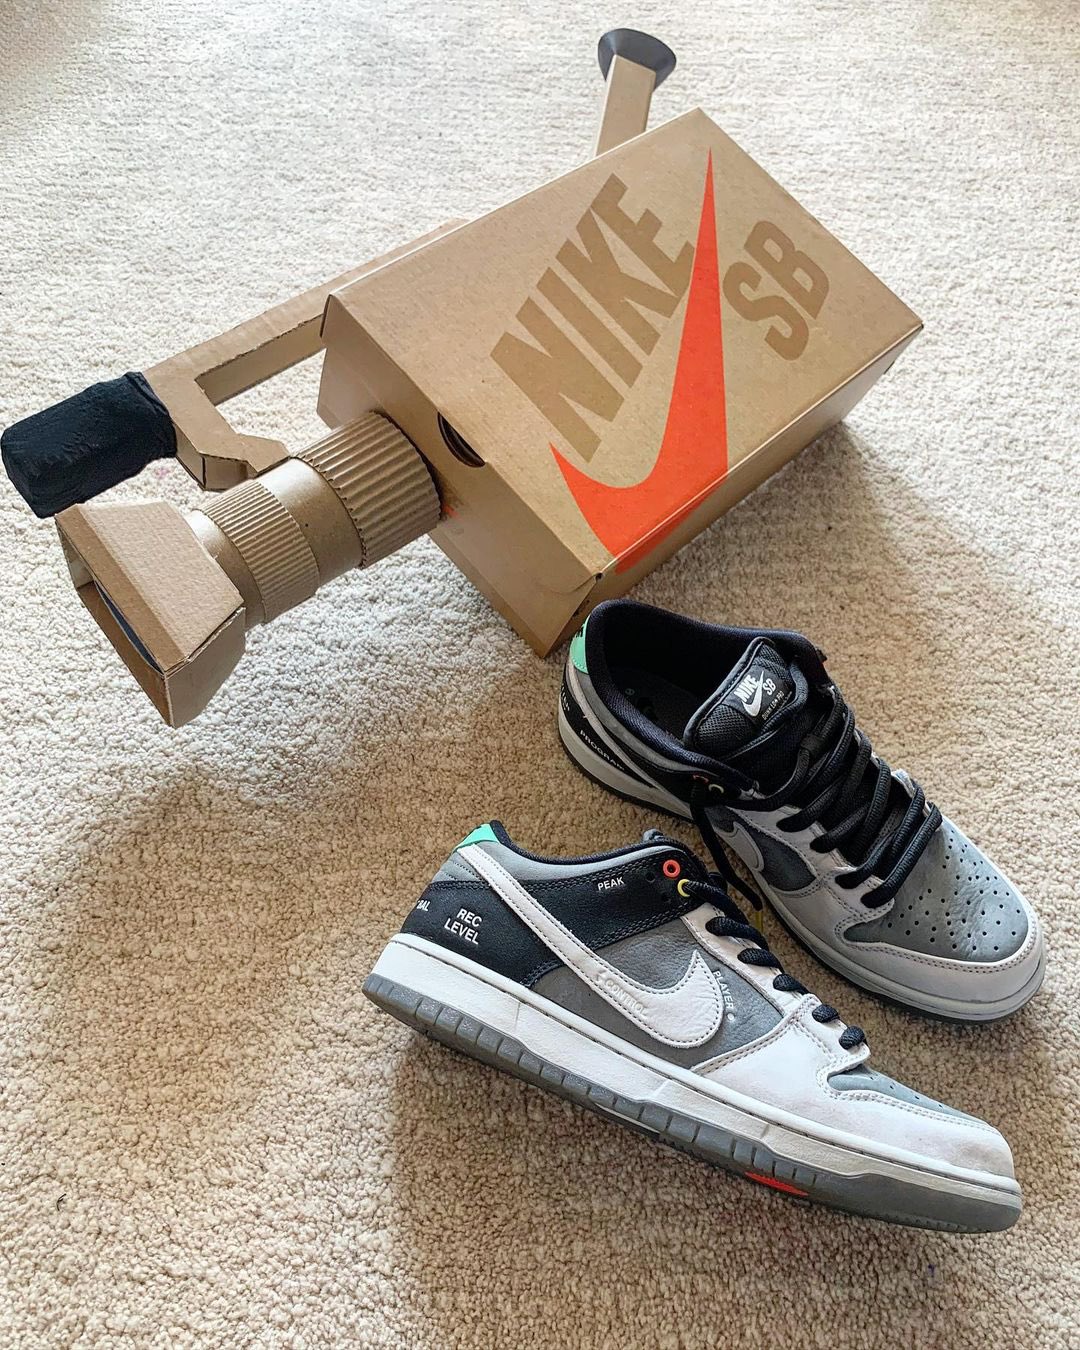 Nike SB Dunk Low VX1000 Camcorder Release Info